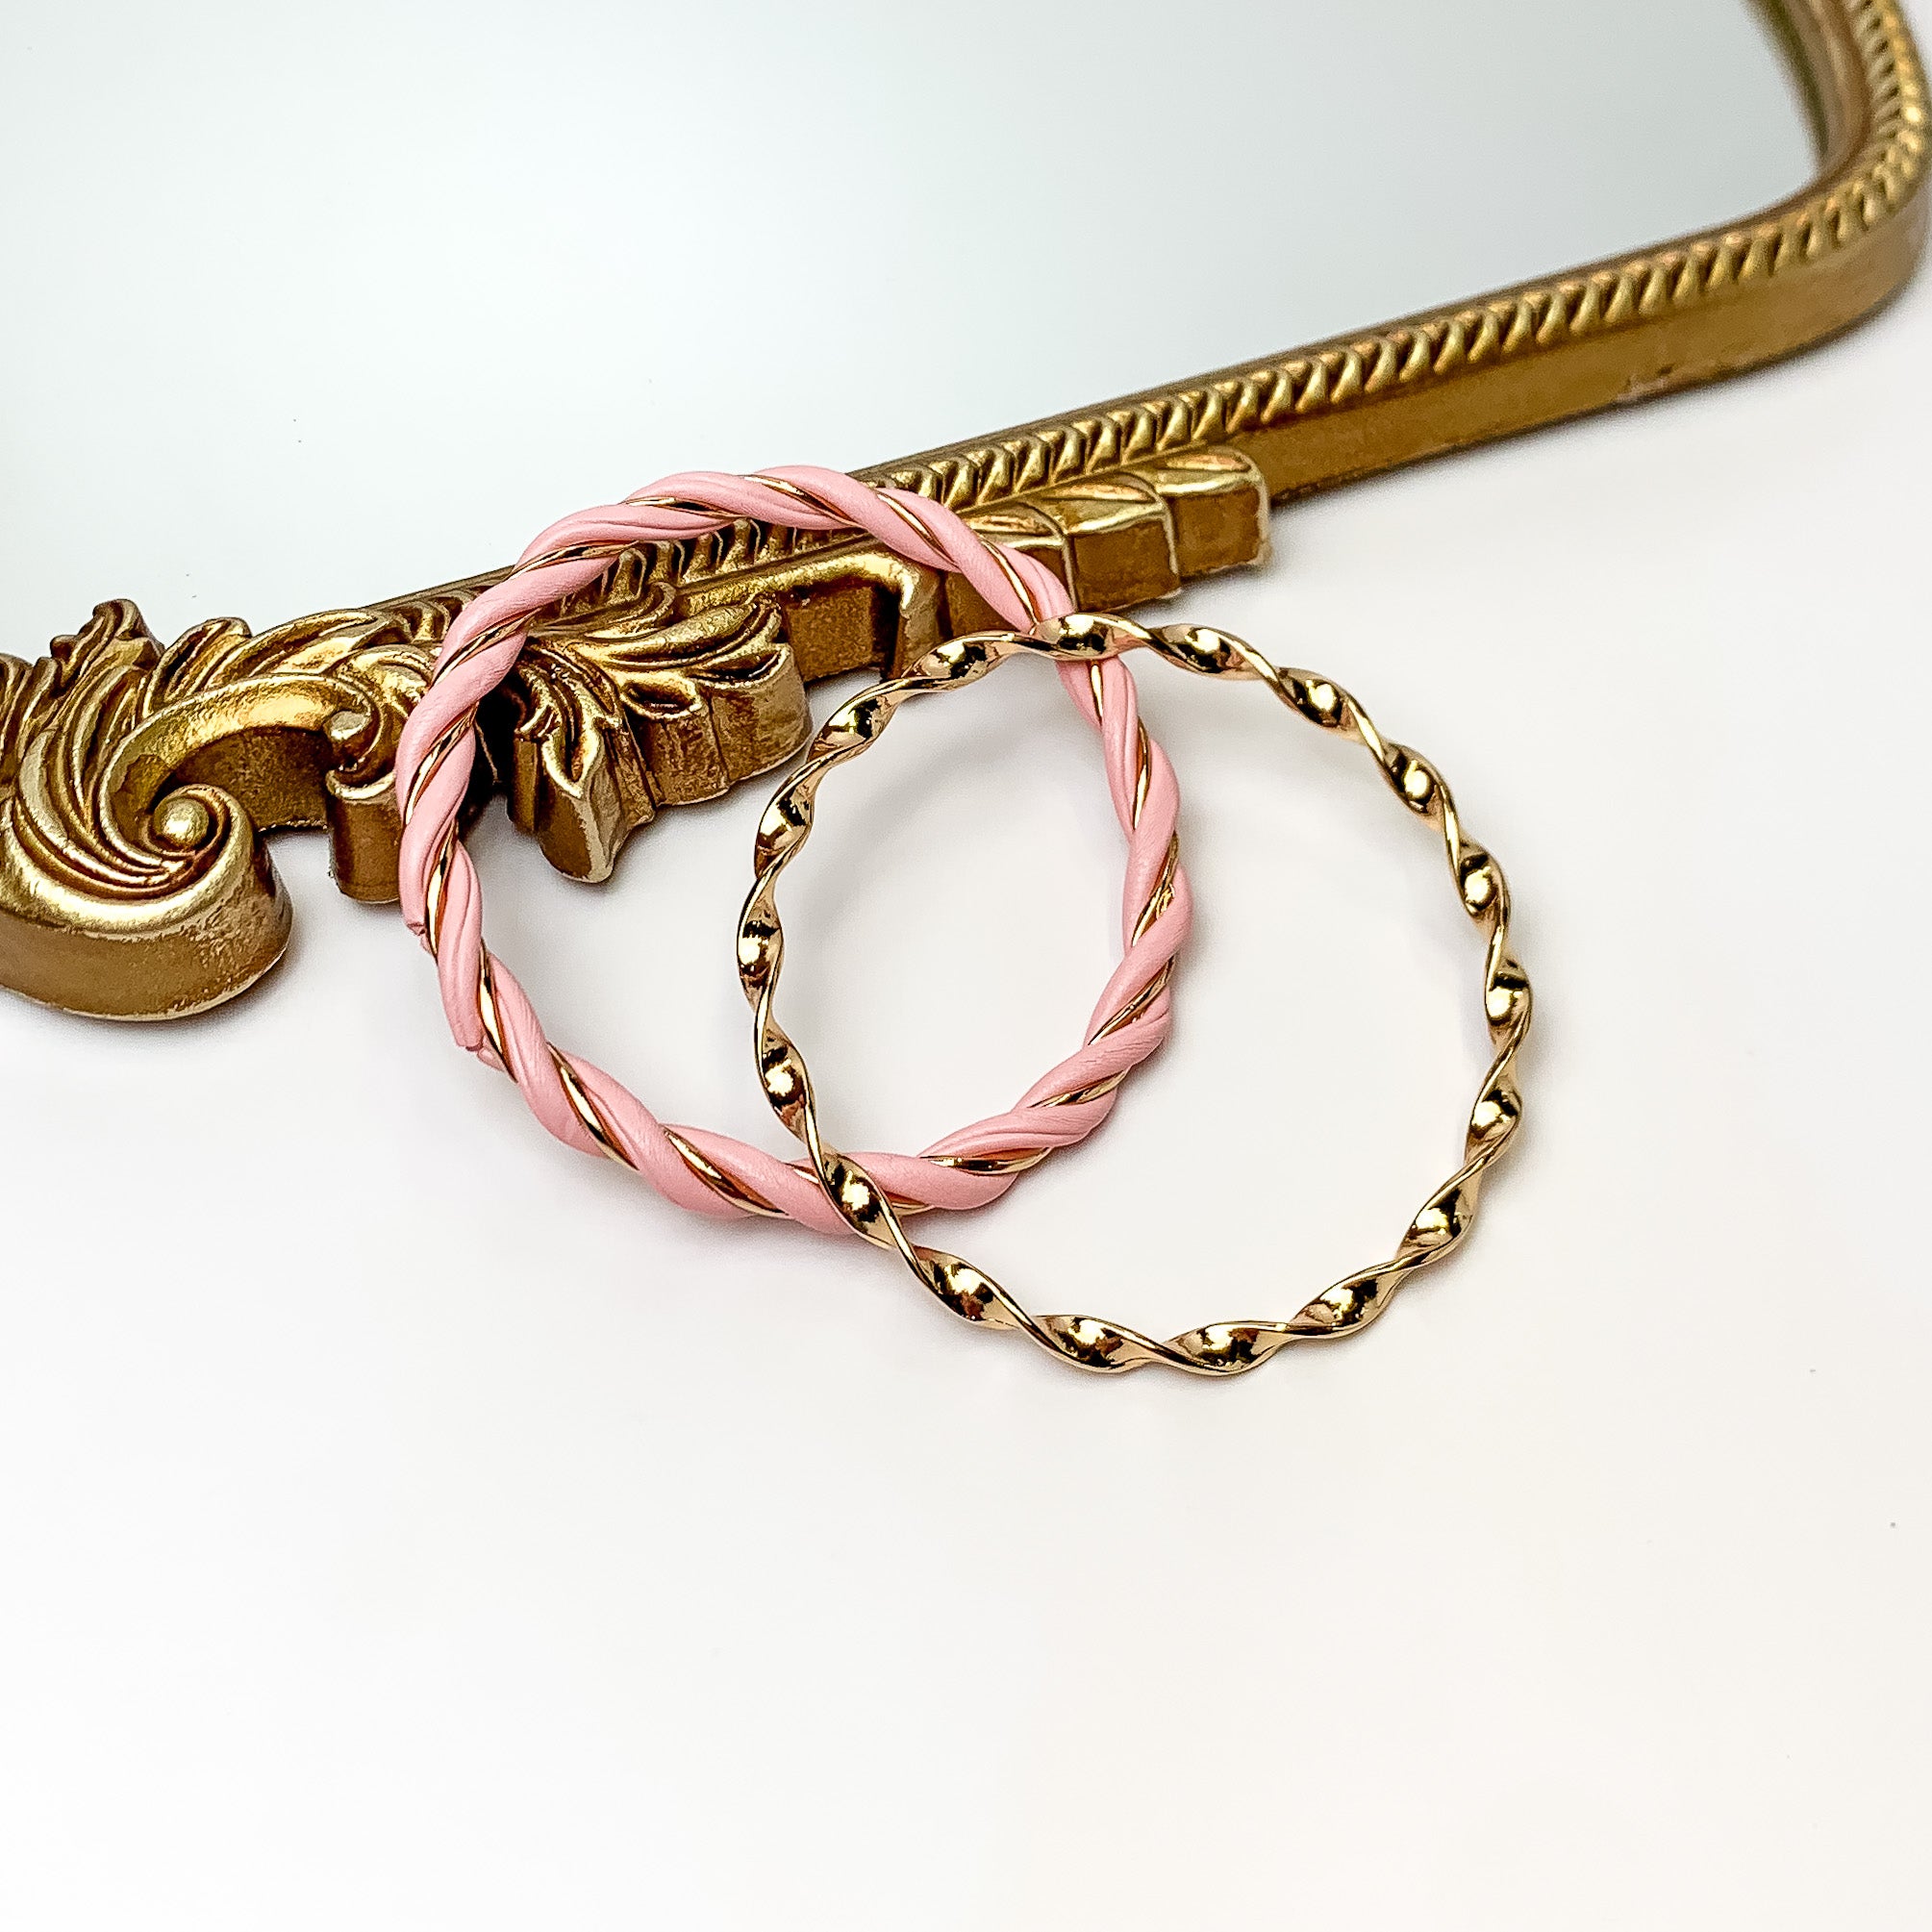 Pictured is a gold twist bangle and gold and pink twist bangle. These bangles are pictured partially leaning on a gold mirror on a white background. 